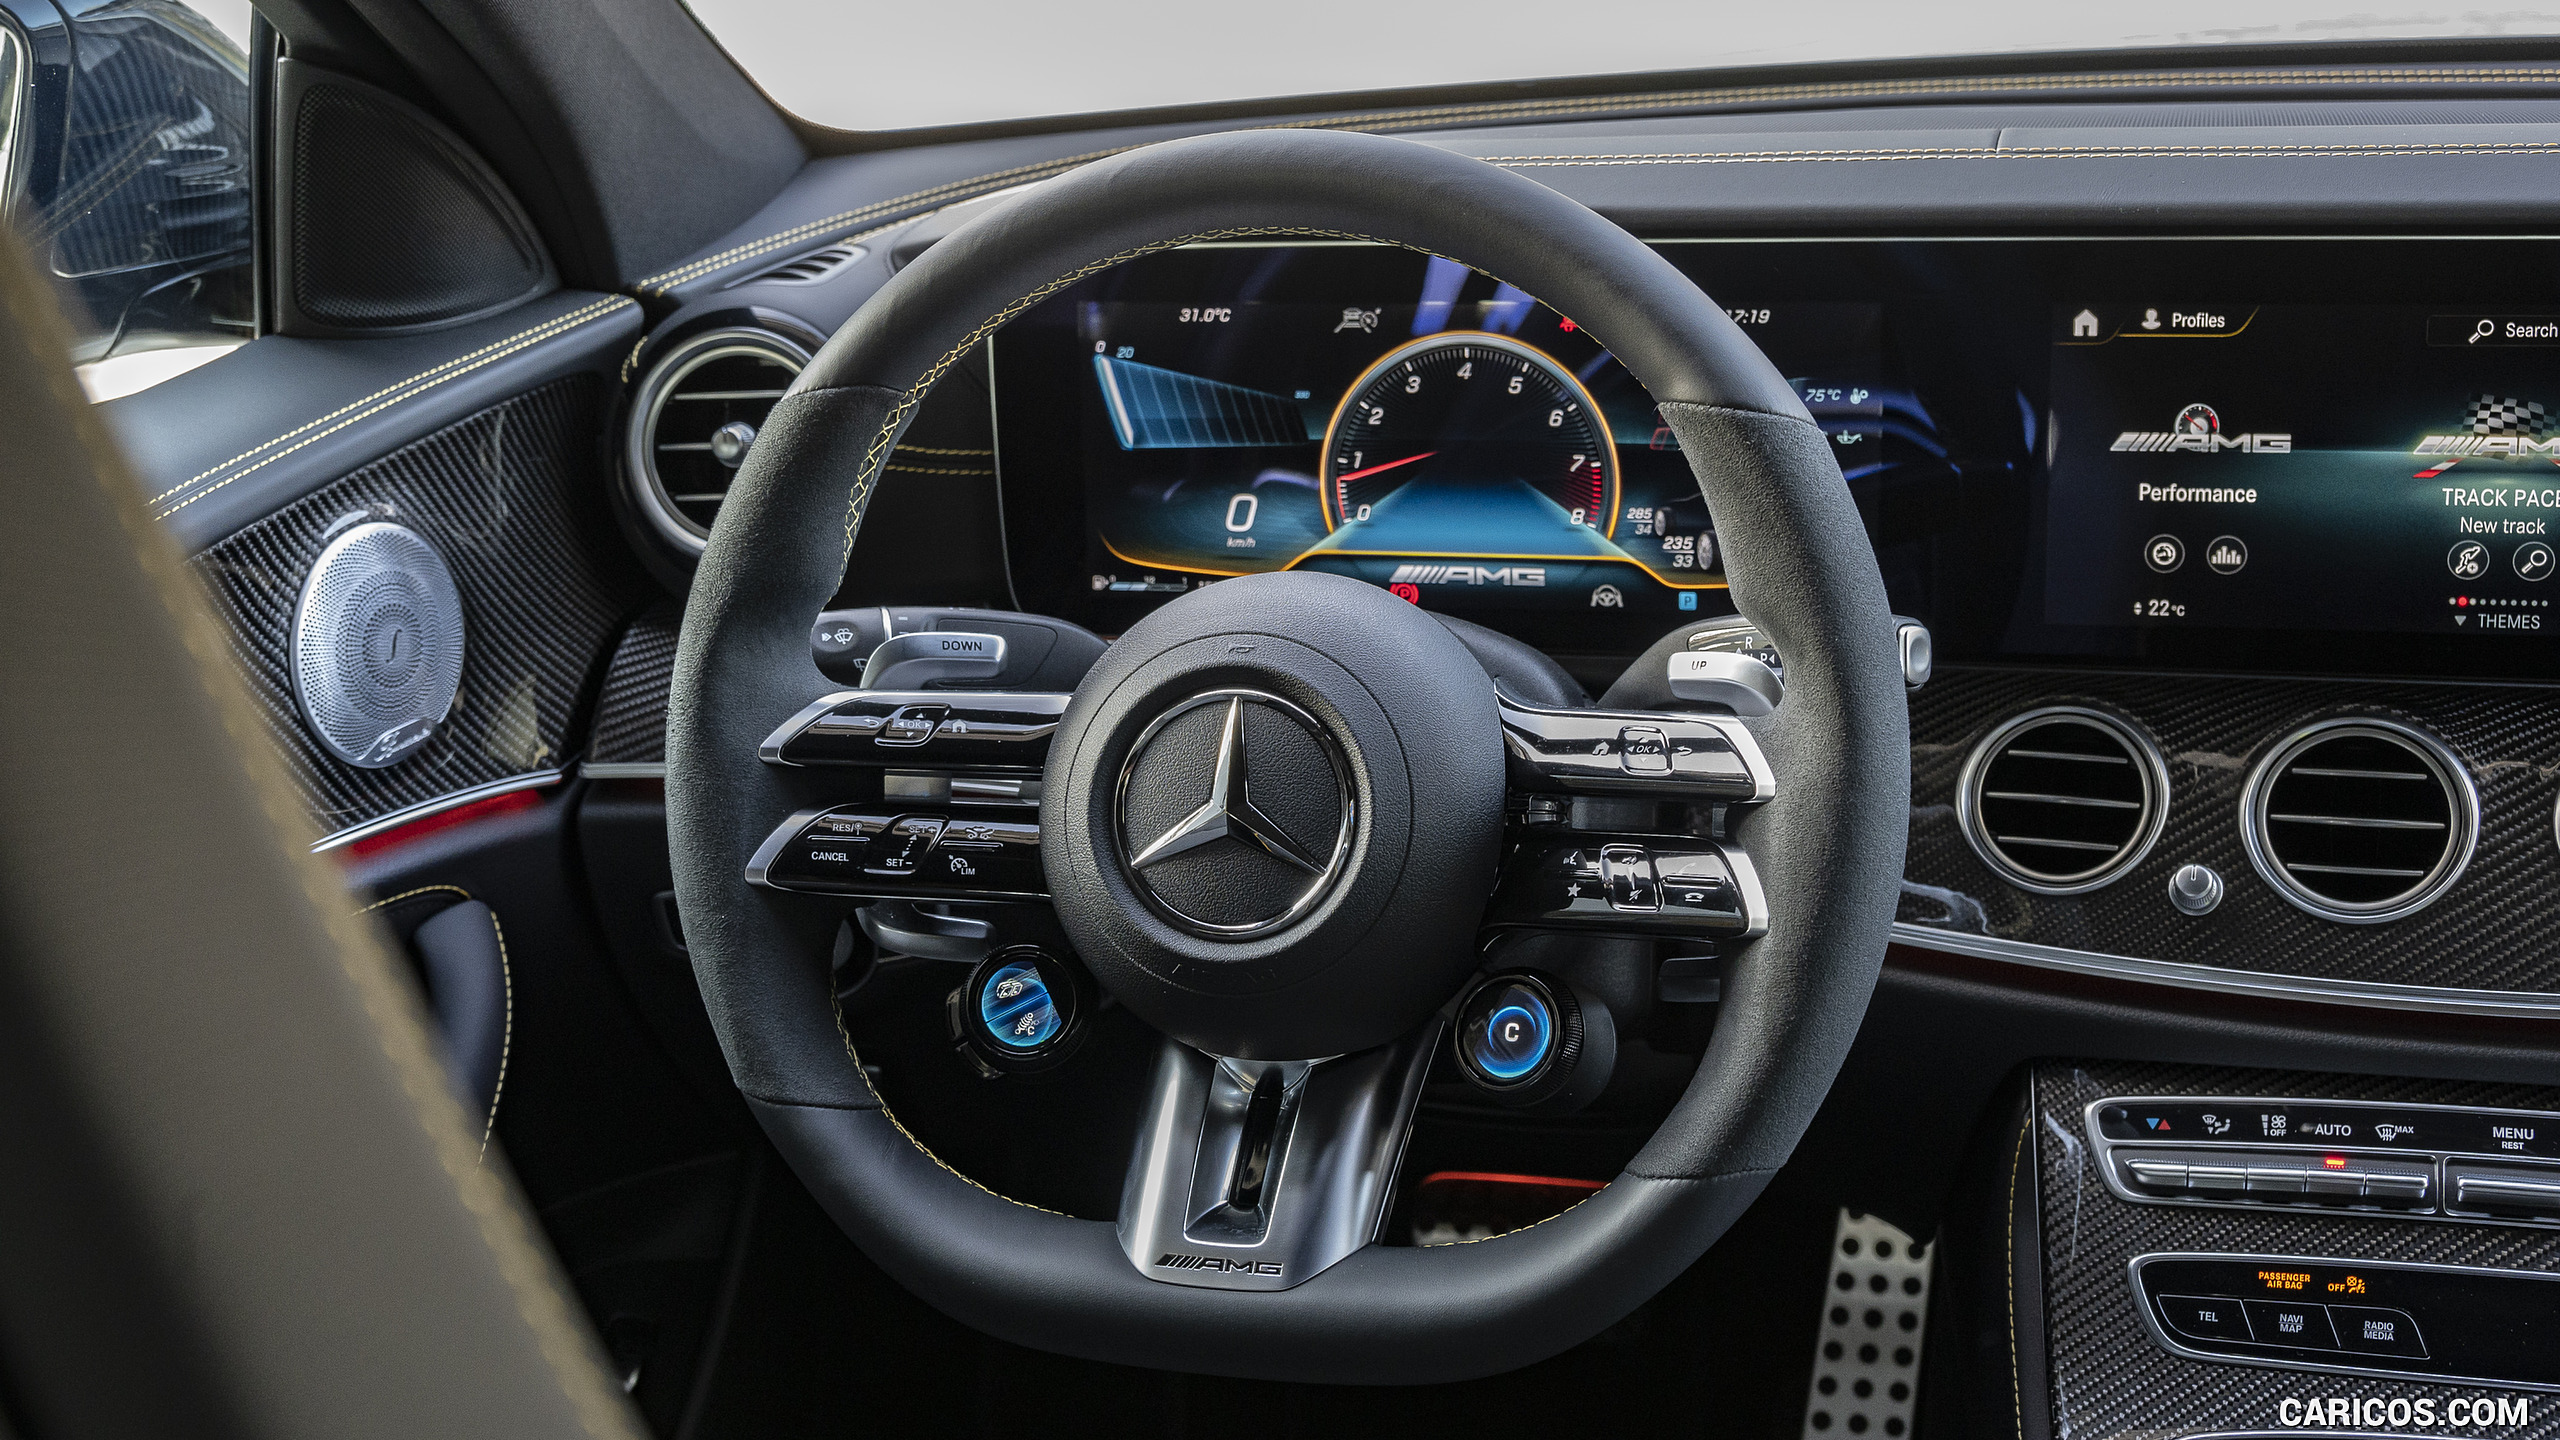 2021 Mercedes-AMG E 63 S 4MATIC+ - Interior, Steering Wheel, #74 of 143